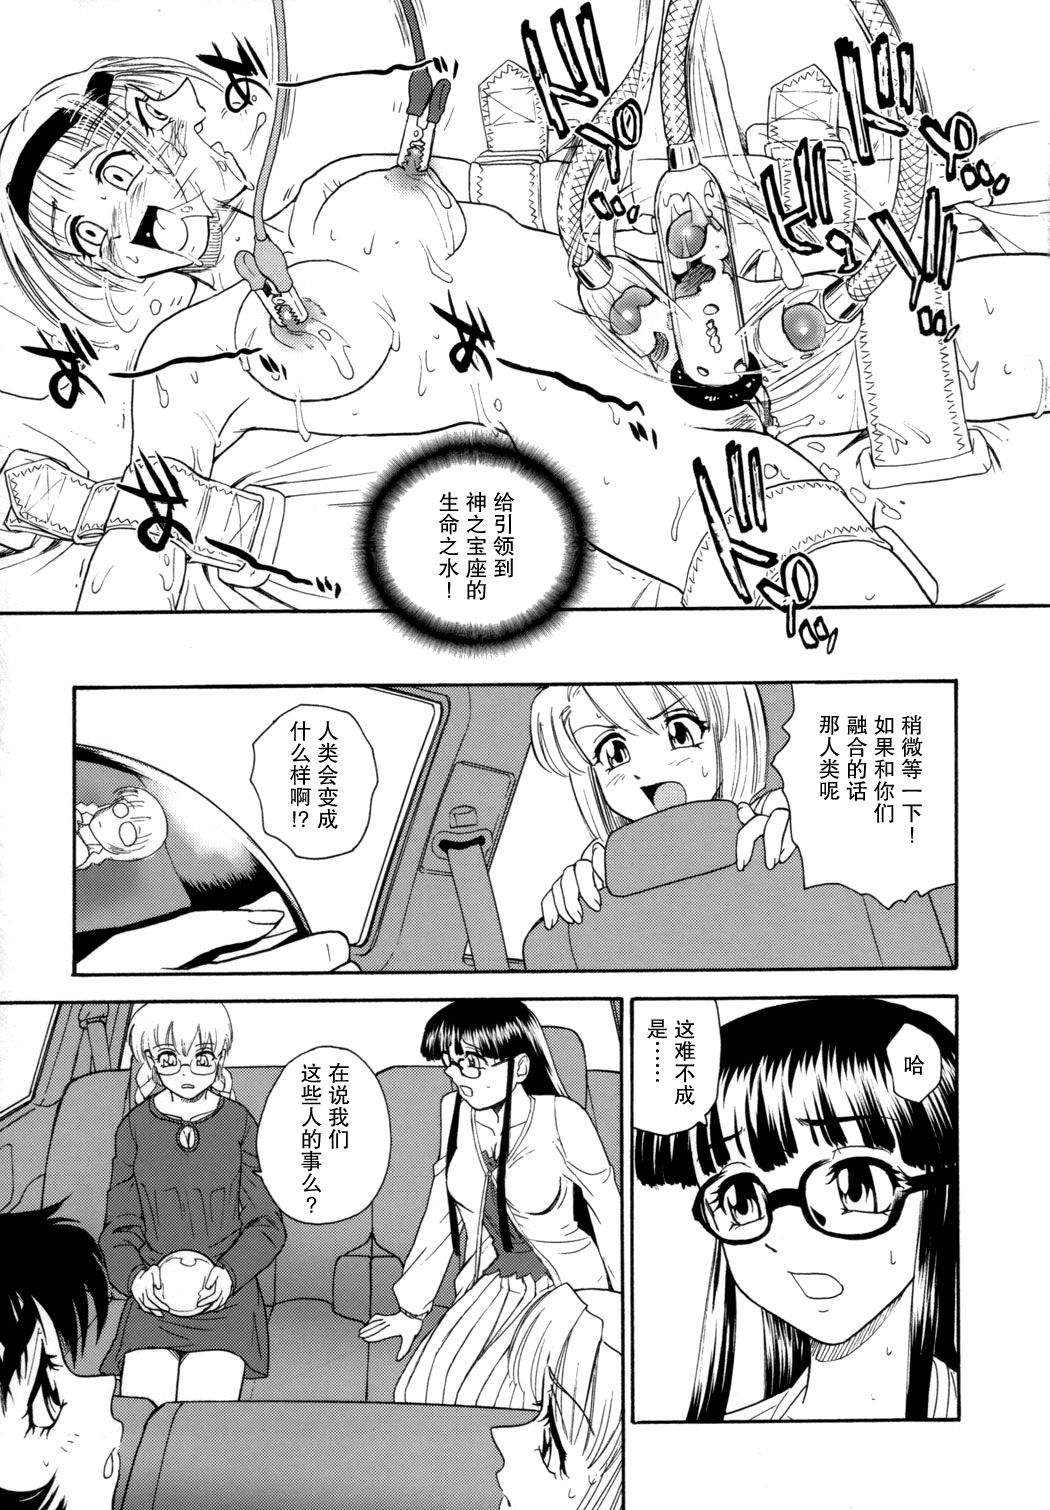 (C72) [Behind Moon (Q)] Dulce Report 9 | 达西报告 9 [Chinese] [哈尼喵汉化组] [Decensored] page 31 full